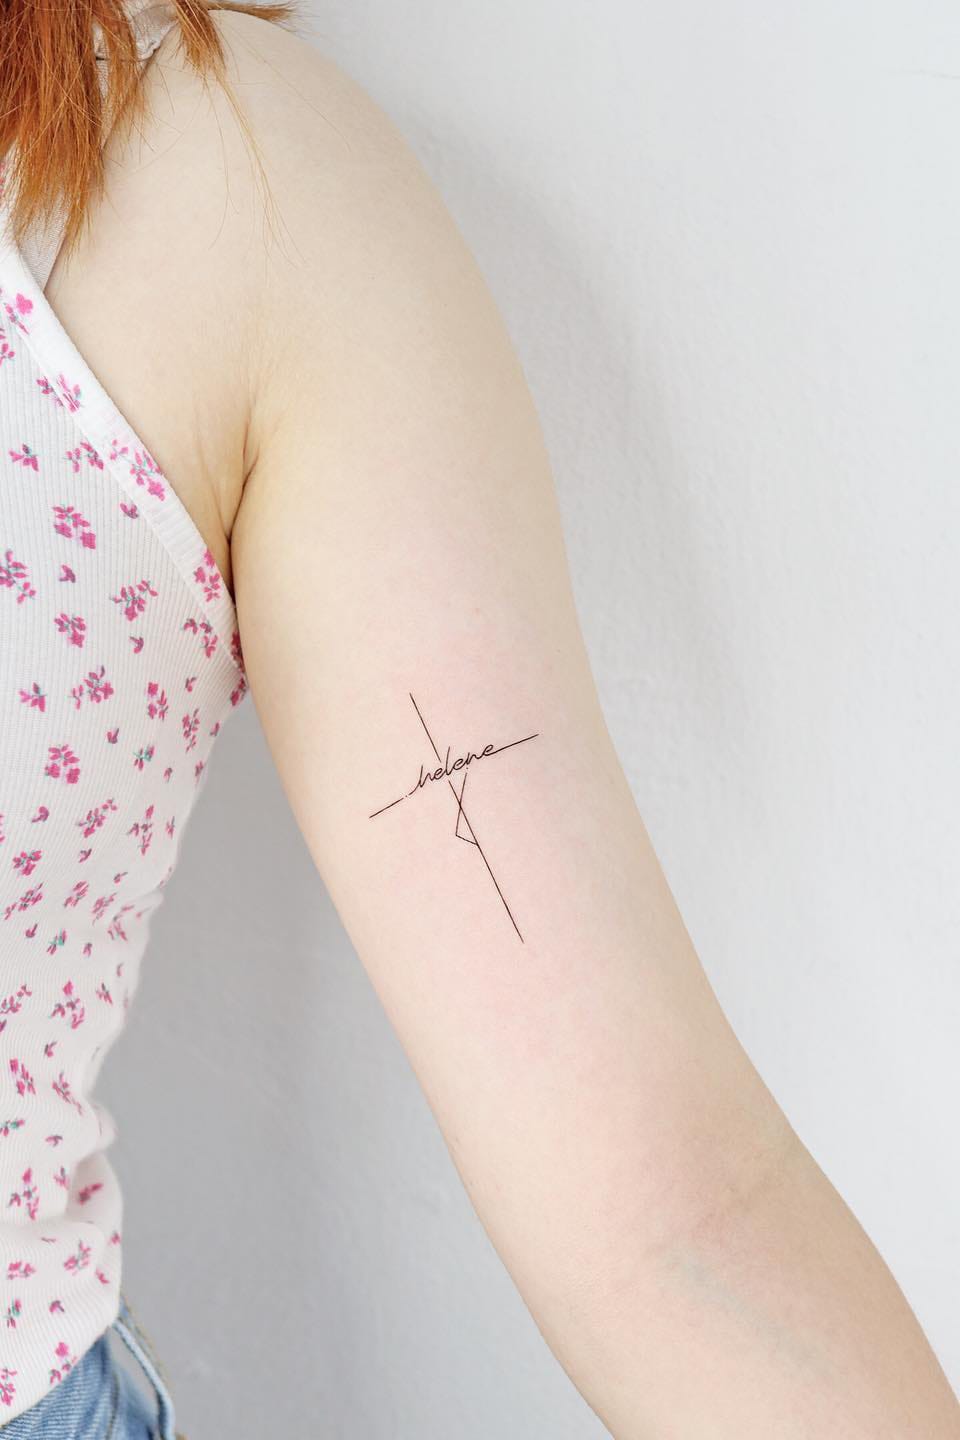 Small cross tattoo with name